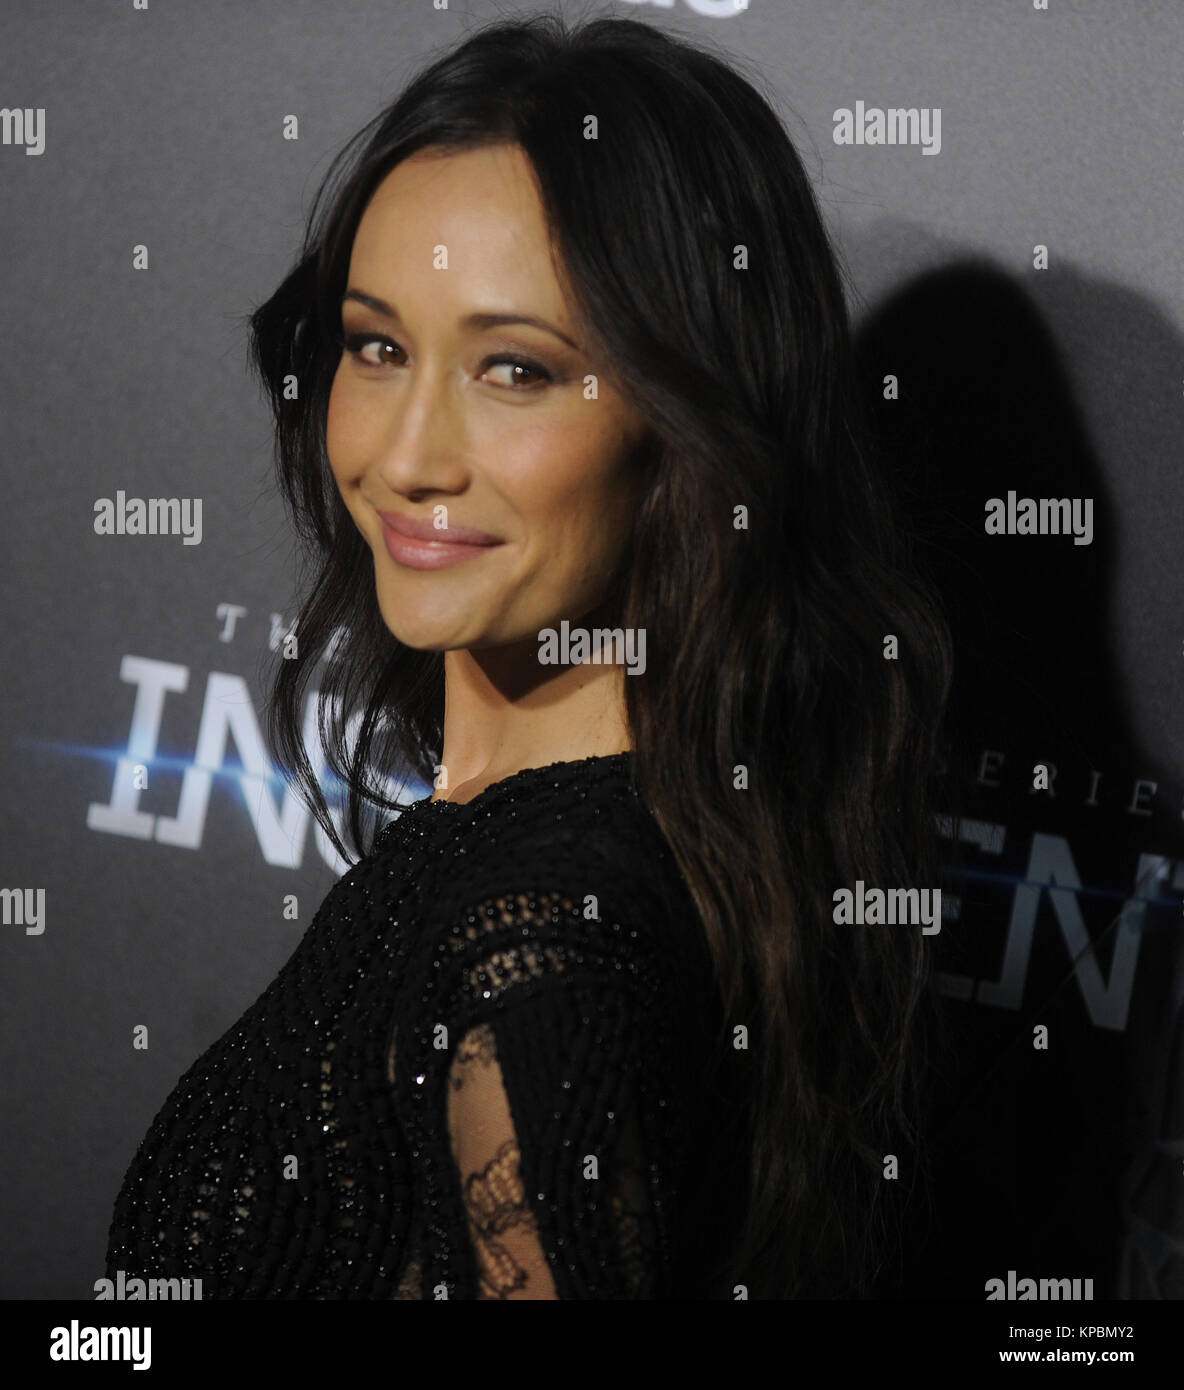 NEW YORK, NY - MARCH 16: Maggie Q attends the 'The Divergent Series: Insurgent' New York premiere at Ziegfeld Theater on March 16, 2015 in New York City  People:  Maggie Q Stock Photo